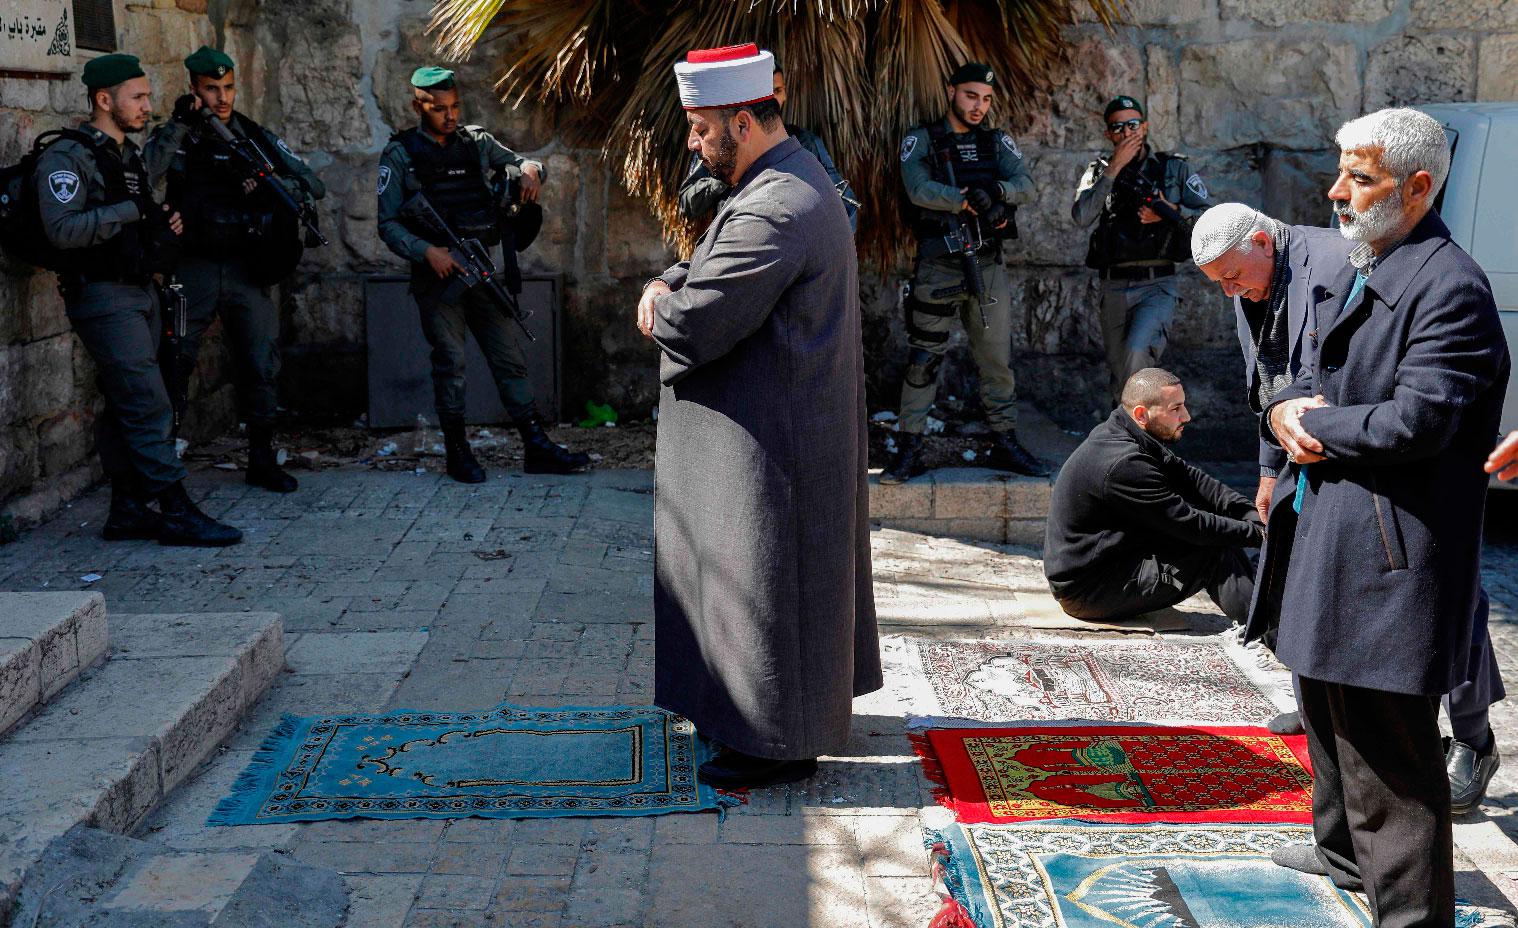 Palestinians, including clerics, pray outside the Lion's Gate entrance to the Aqsa mosque compound on March 8, 2019.